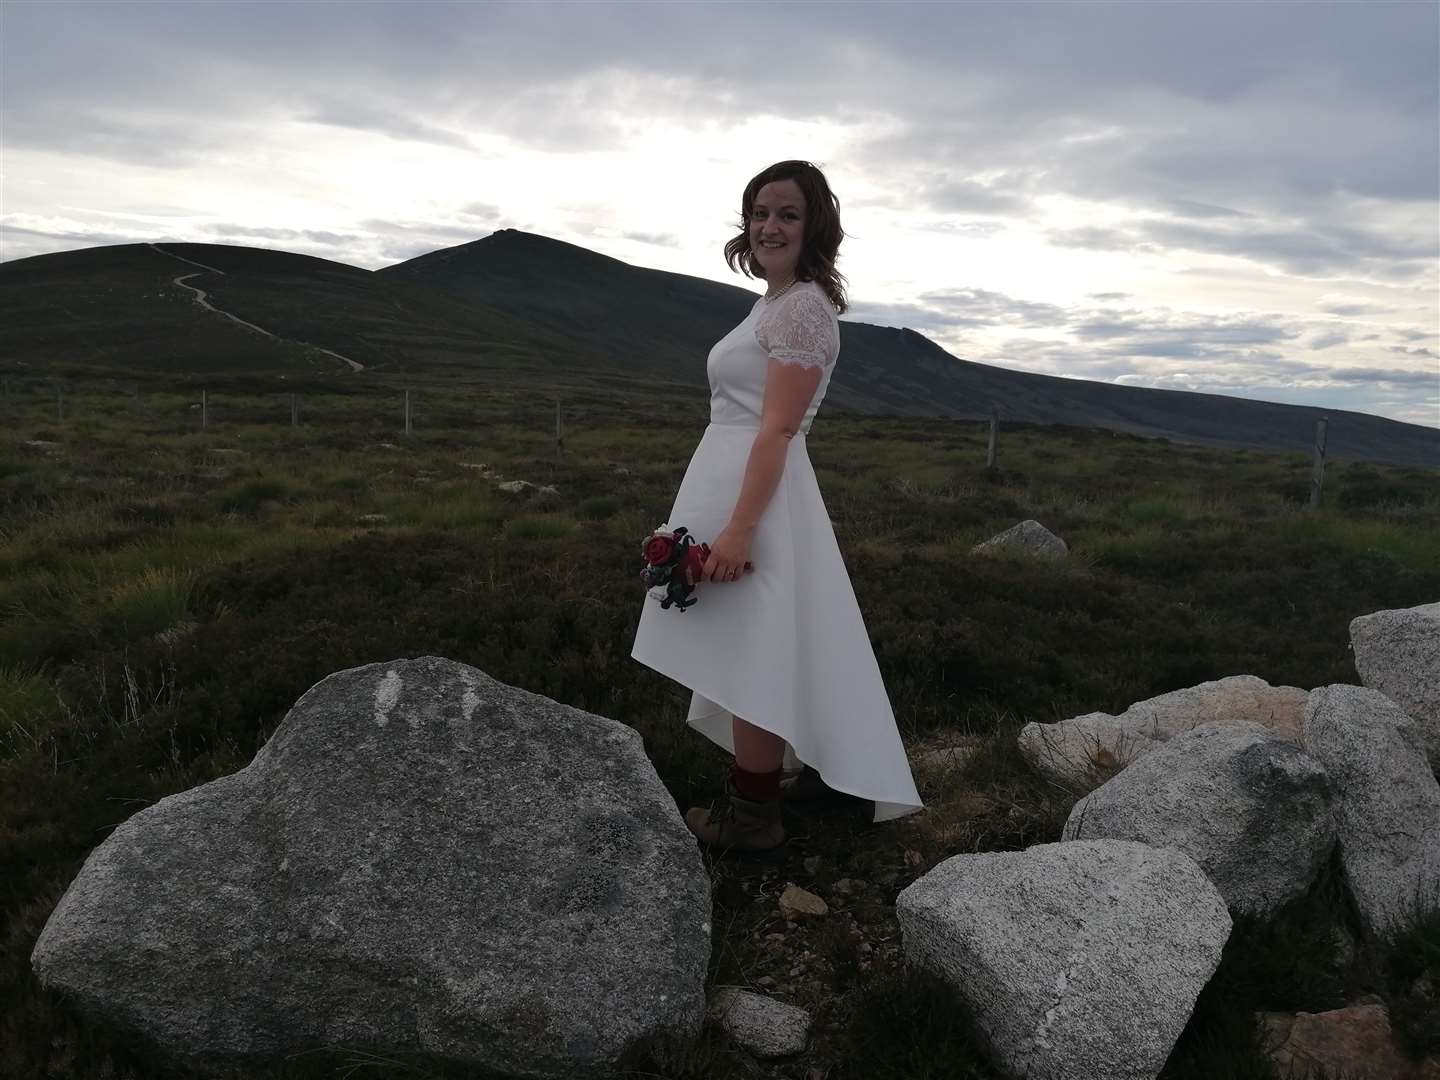 Sarah looks stunning in her wedding dress and hiking boots.